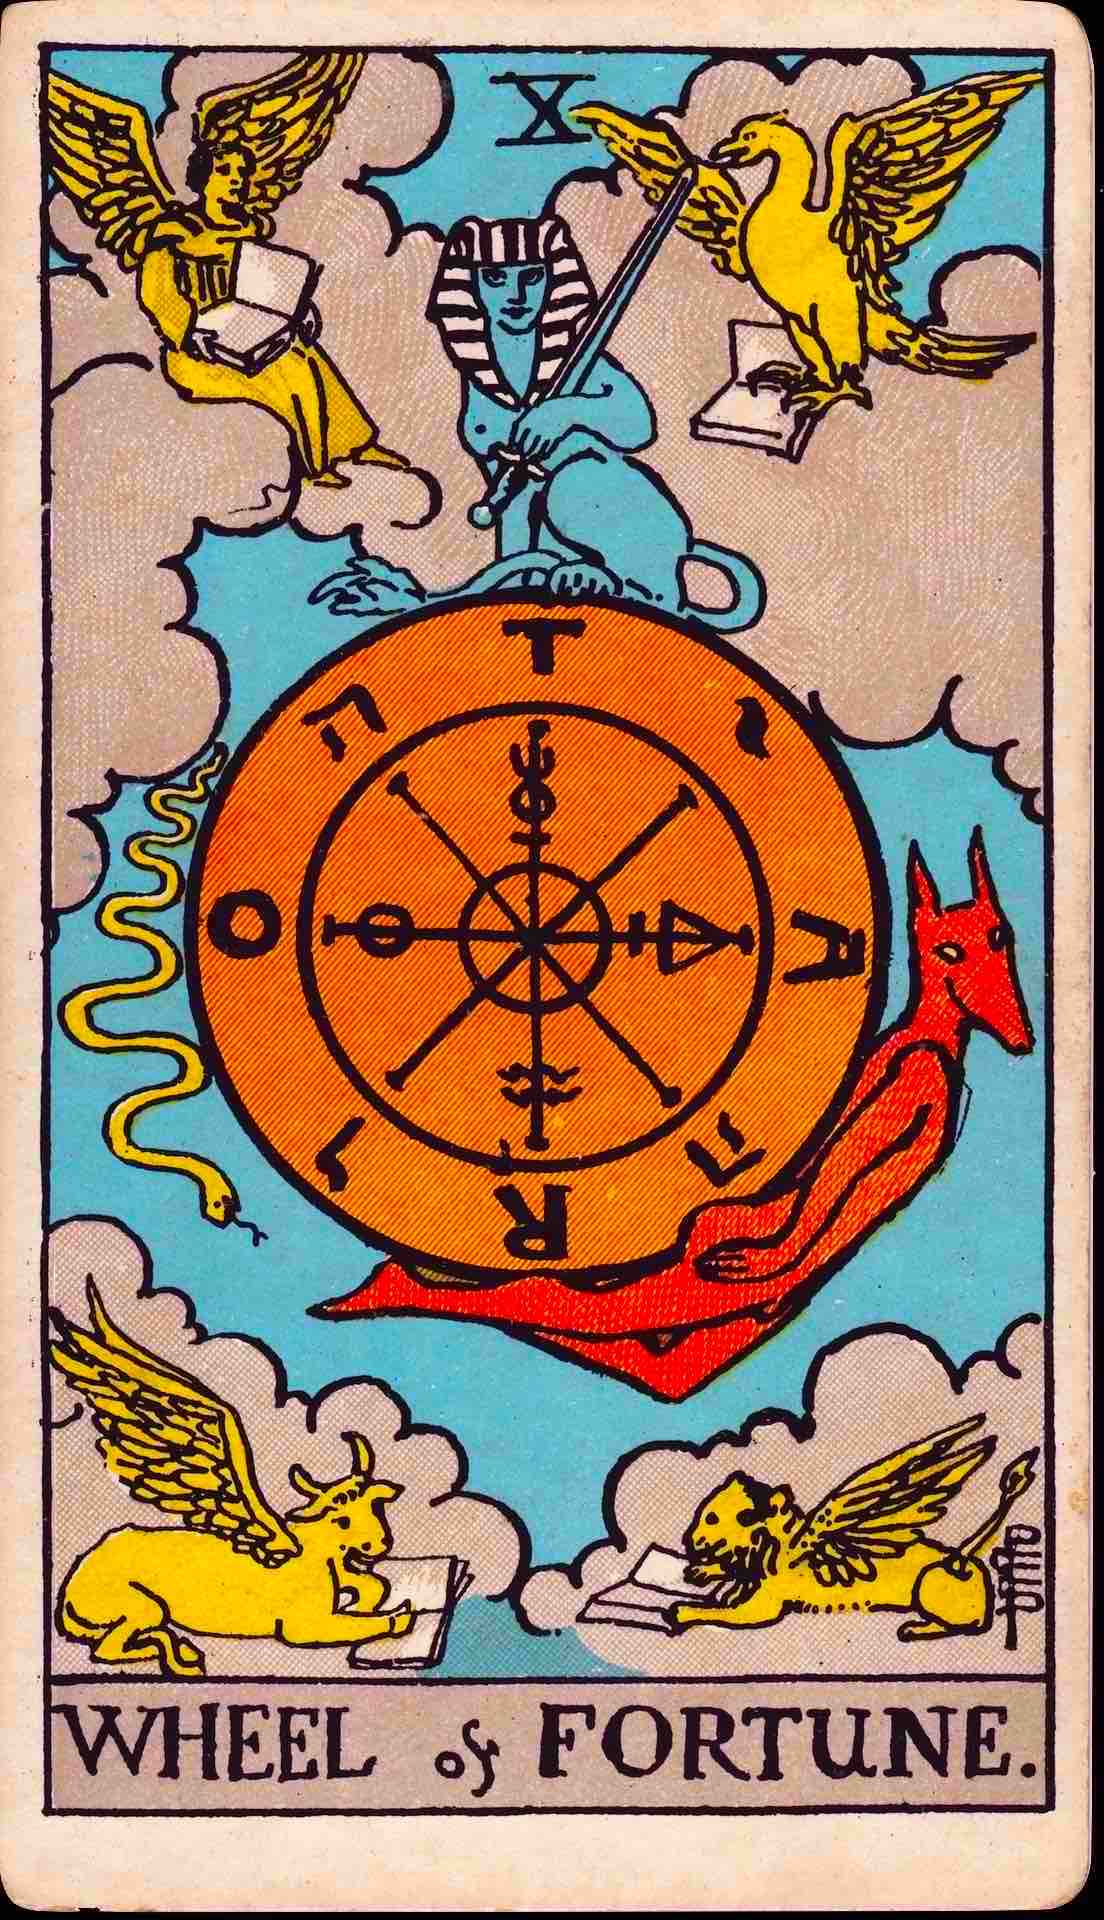 The Wheel of Fortune tarot card